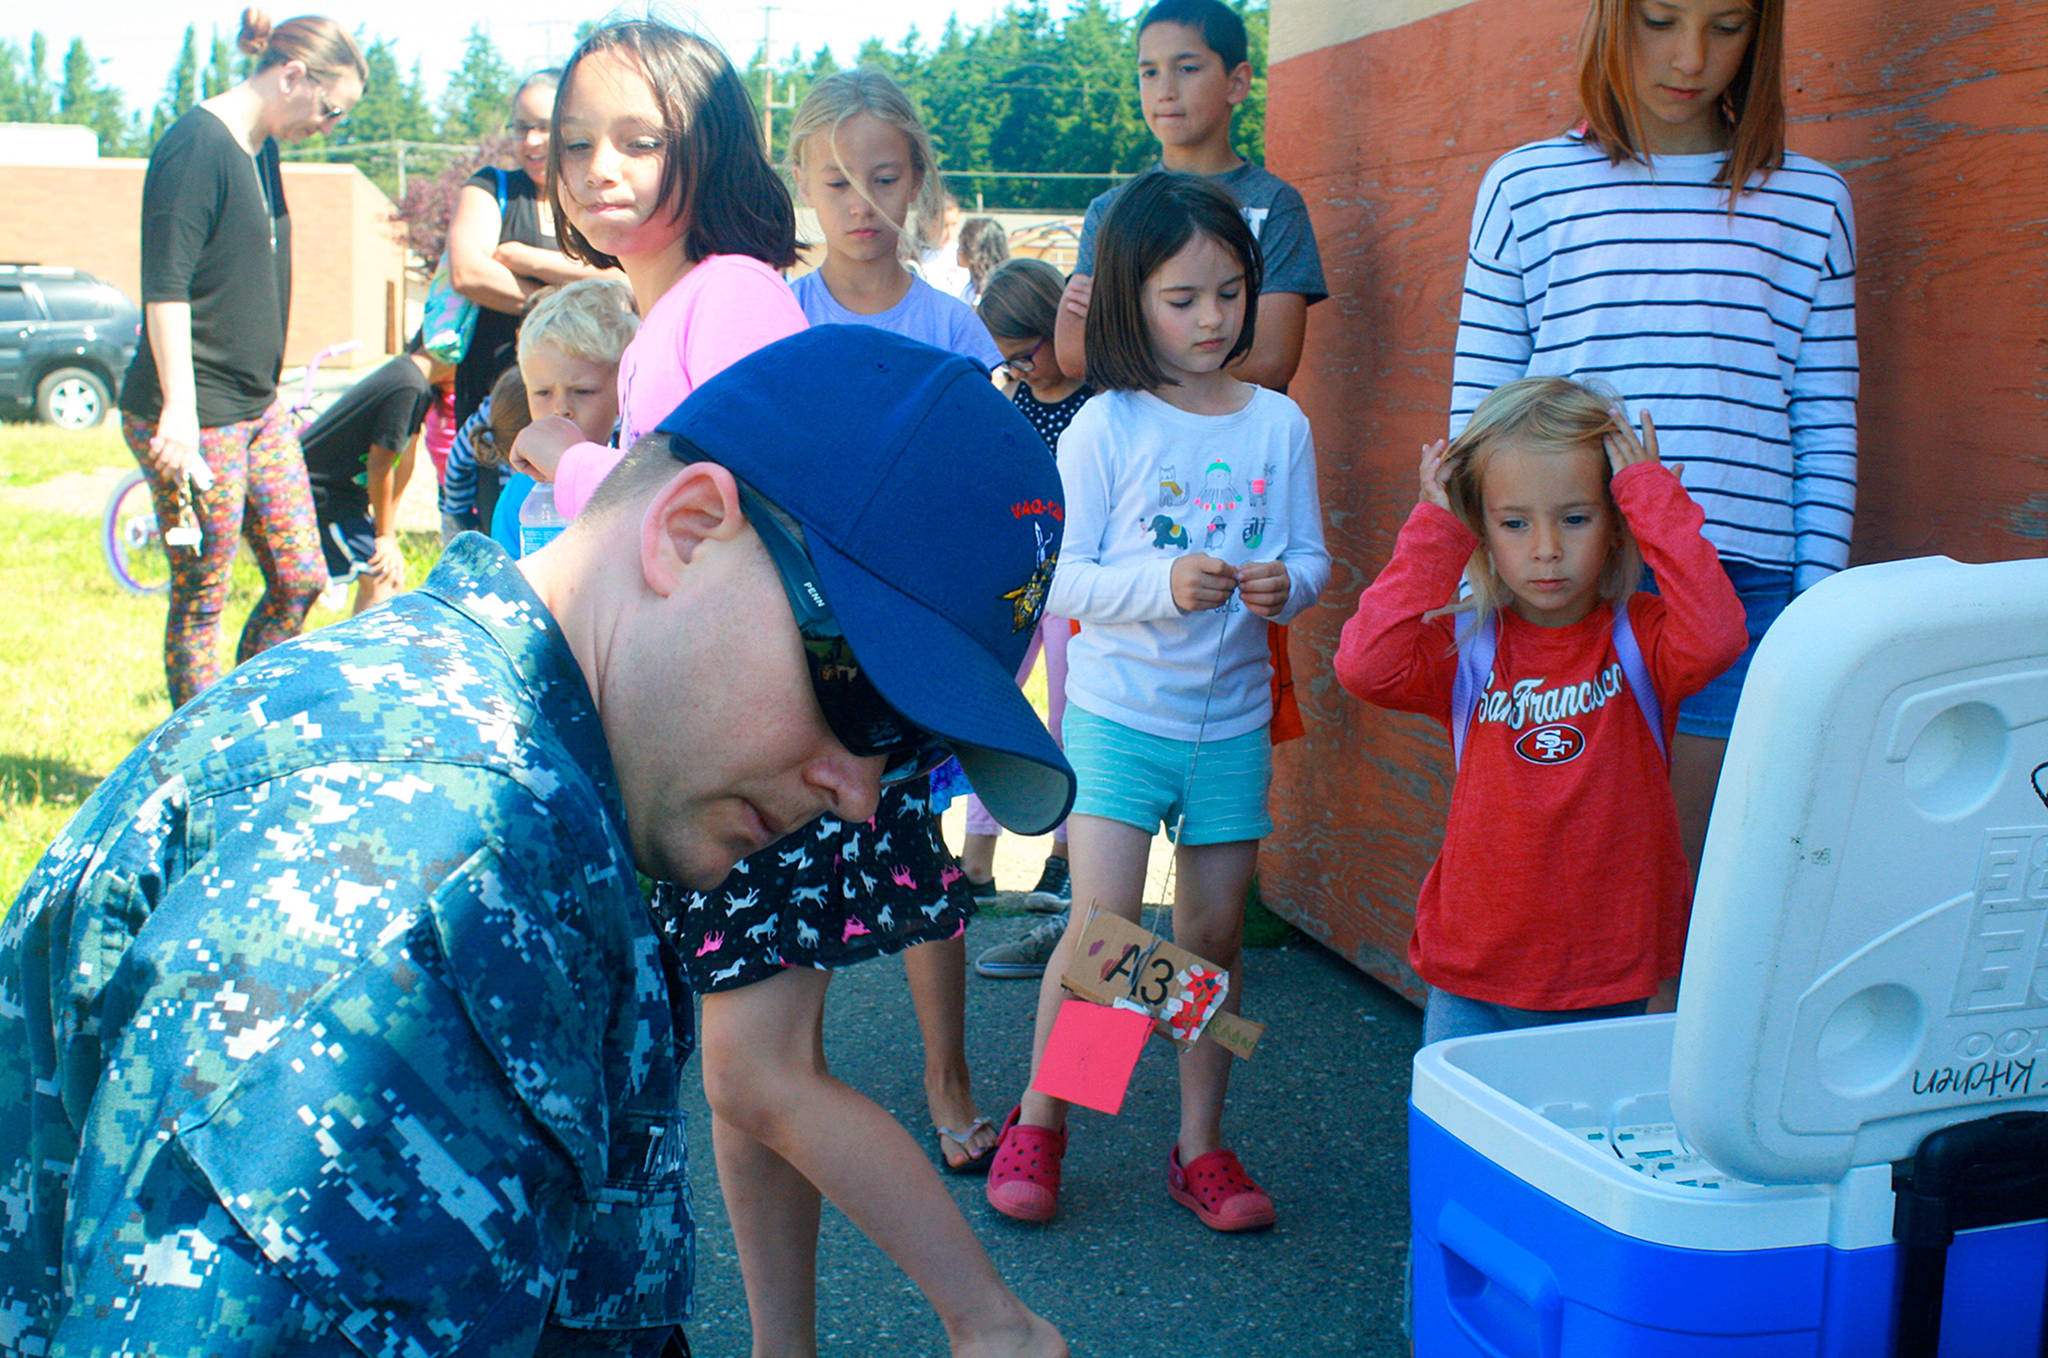 Rory Taylor, U.S. Navy petty officer second class, volunteers at Crescent Harbor Elementary June 29, where he assembles and distributes free sack lunches for children 18-and-under for Oak Harbor Public Schools’ summer lunch program. Photo by Daniel Warn/Whidbey News-Times